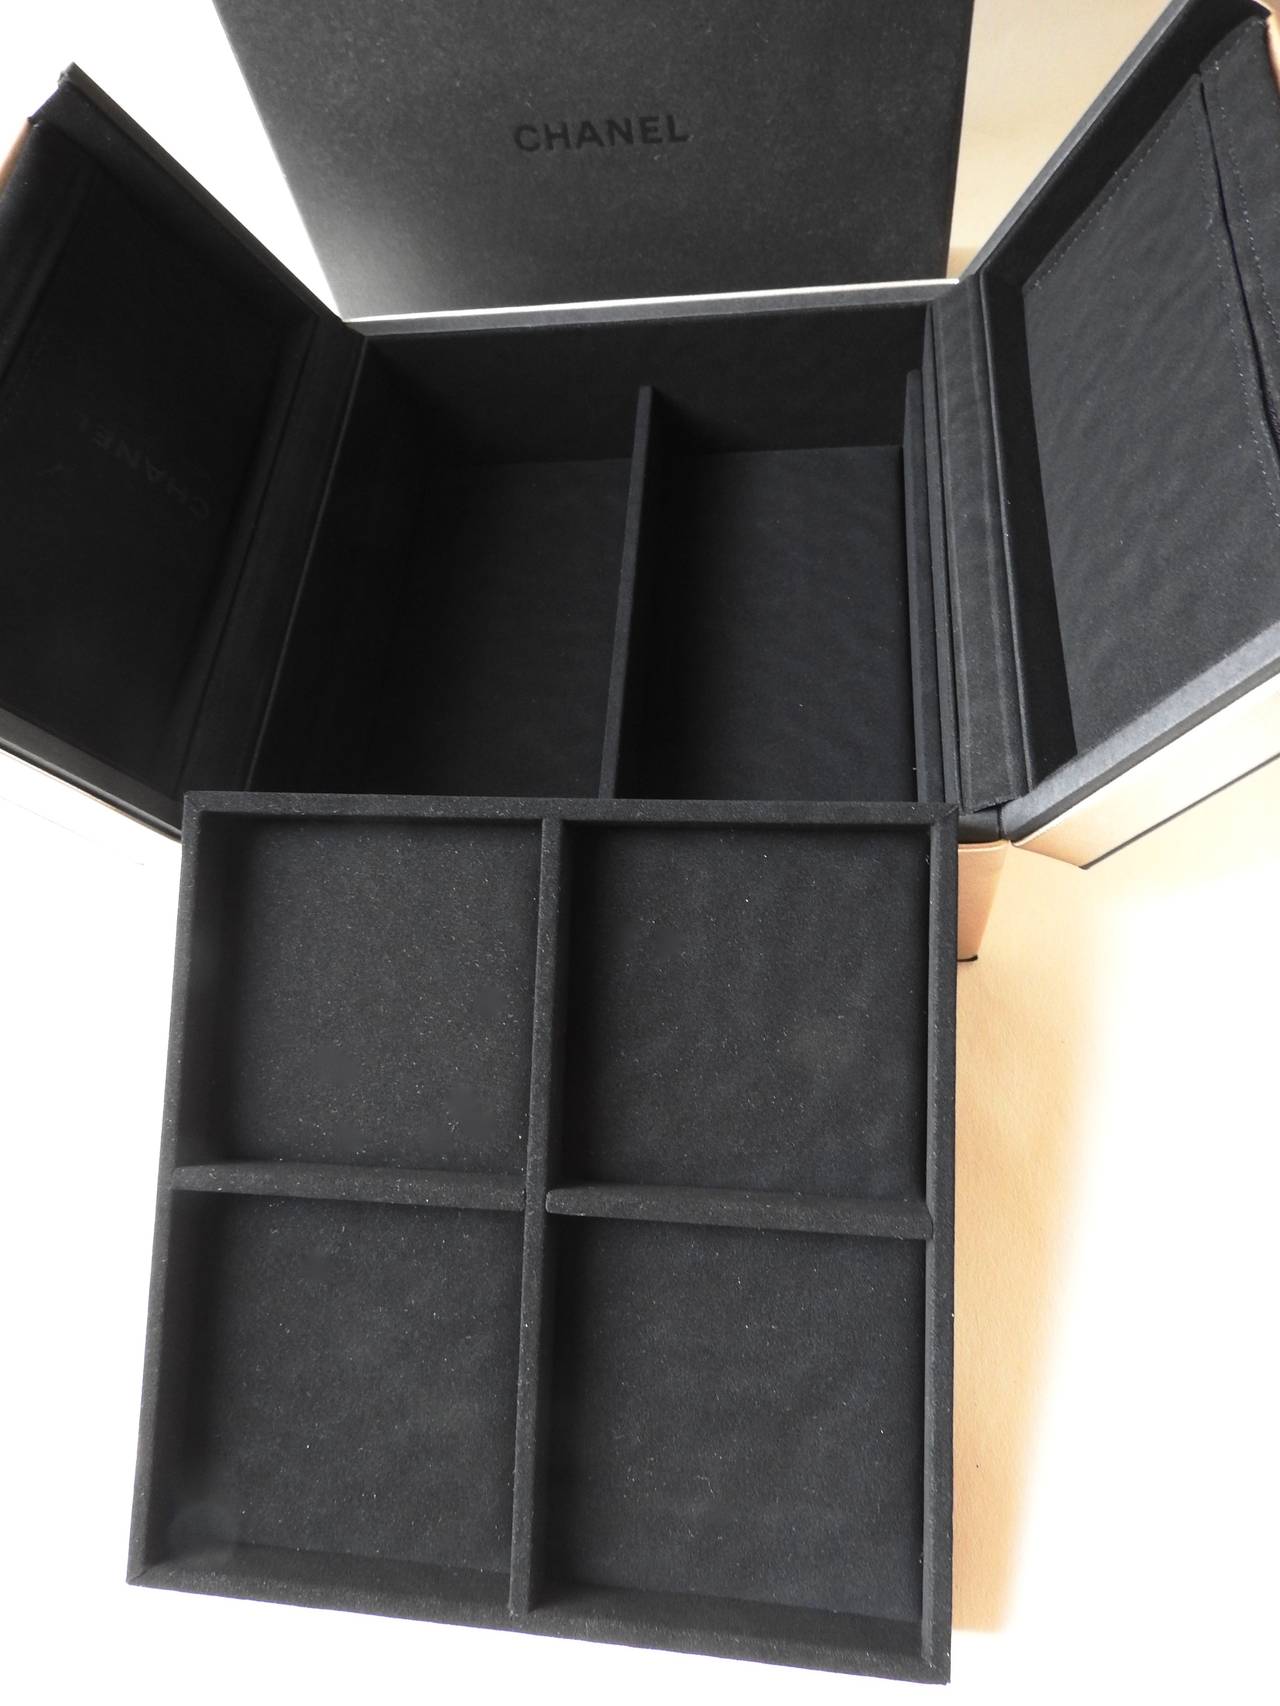 Each year Chanel company prepares some present for their top tier customers and delivers these present in person by their representatives.   
This beautiful lambskin suede and velvet 2-story jewellery storage box is one of the top tier customer's